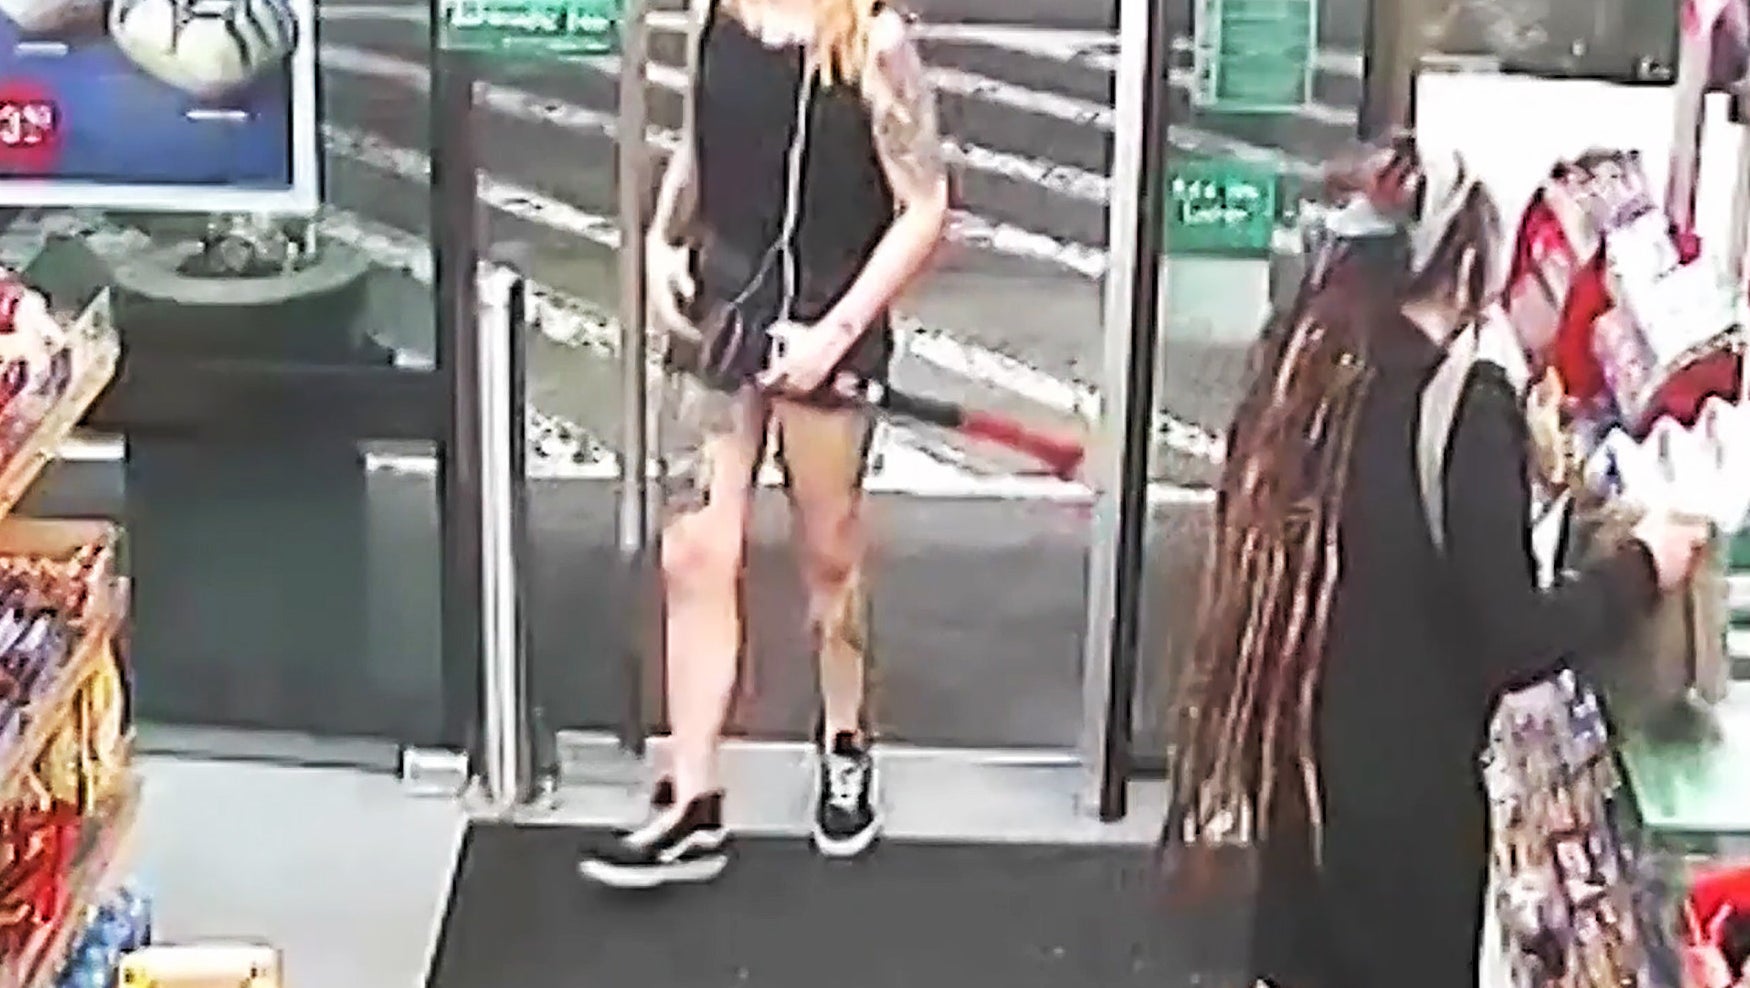 Woman Who Attacked Strangers With An Axe In 7-Eleven Has Jail Sentence  Increased